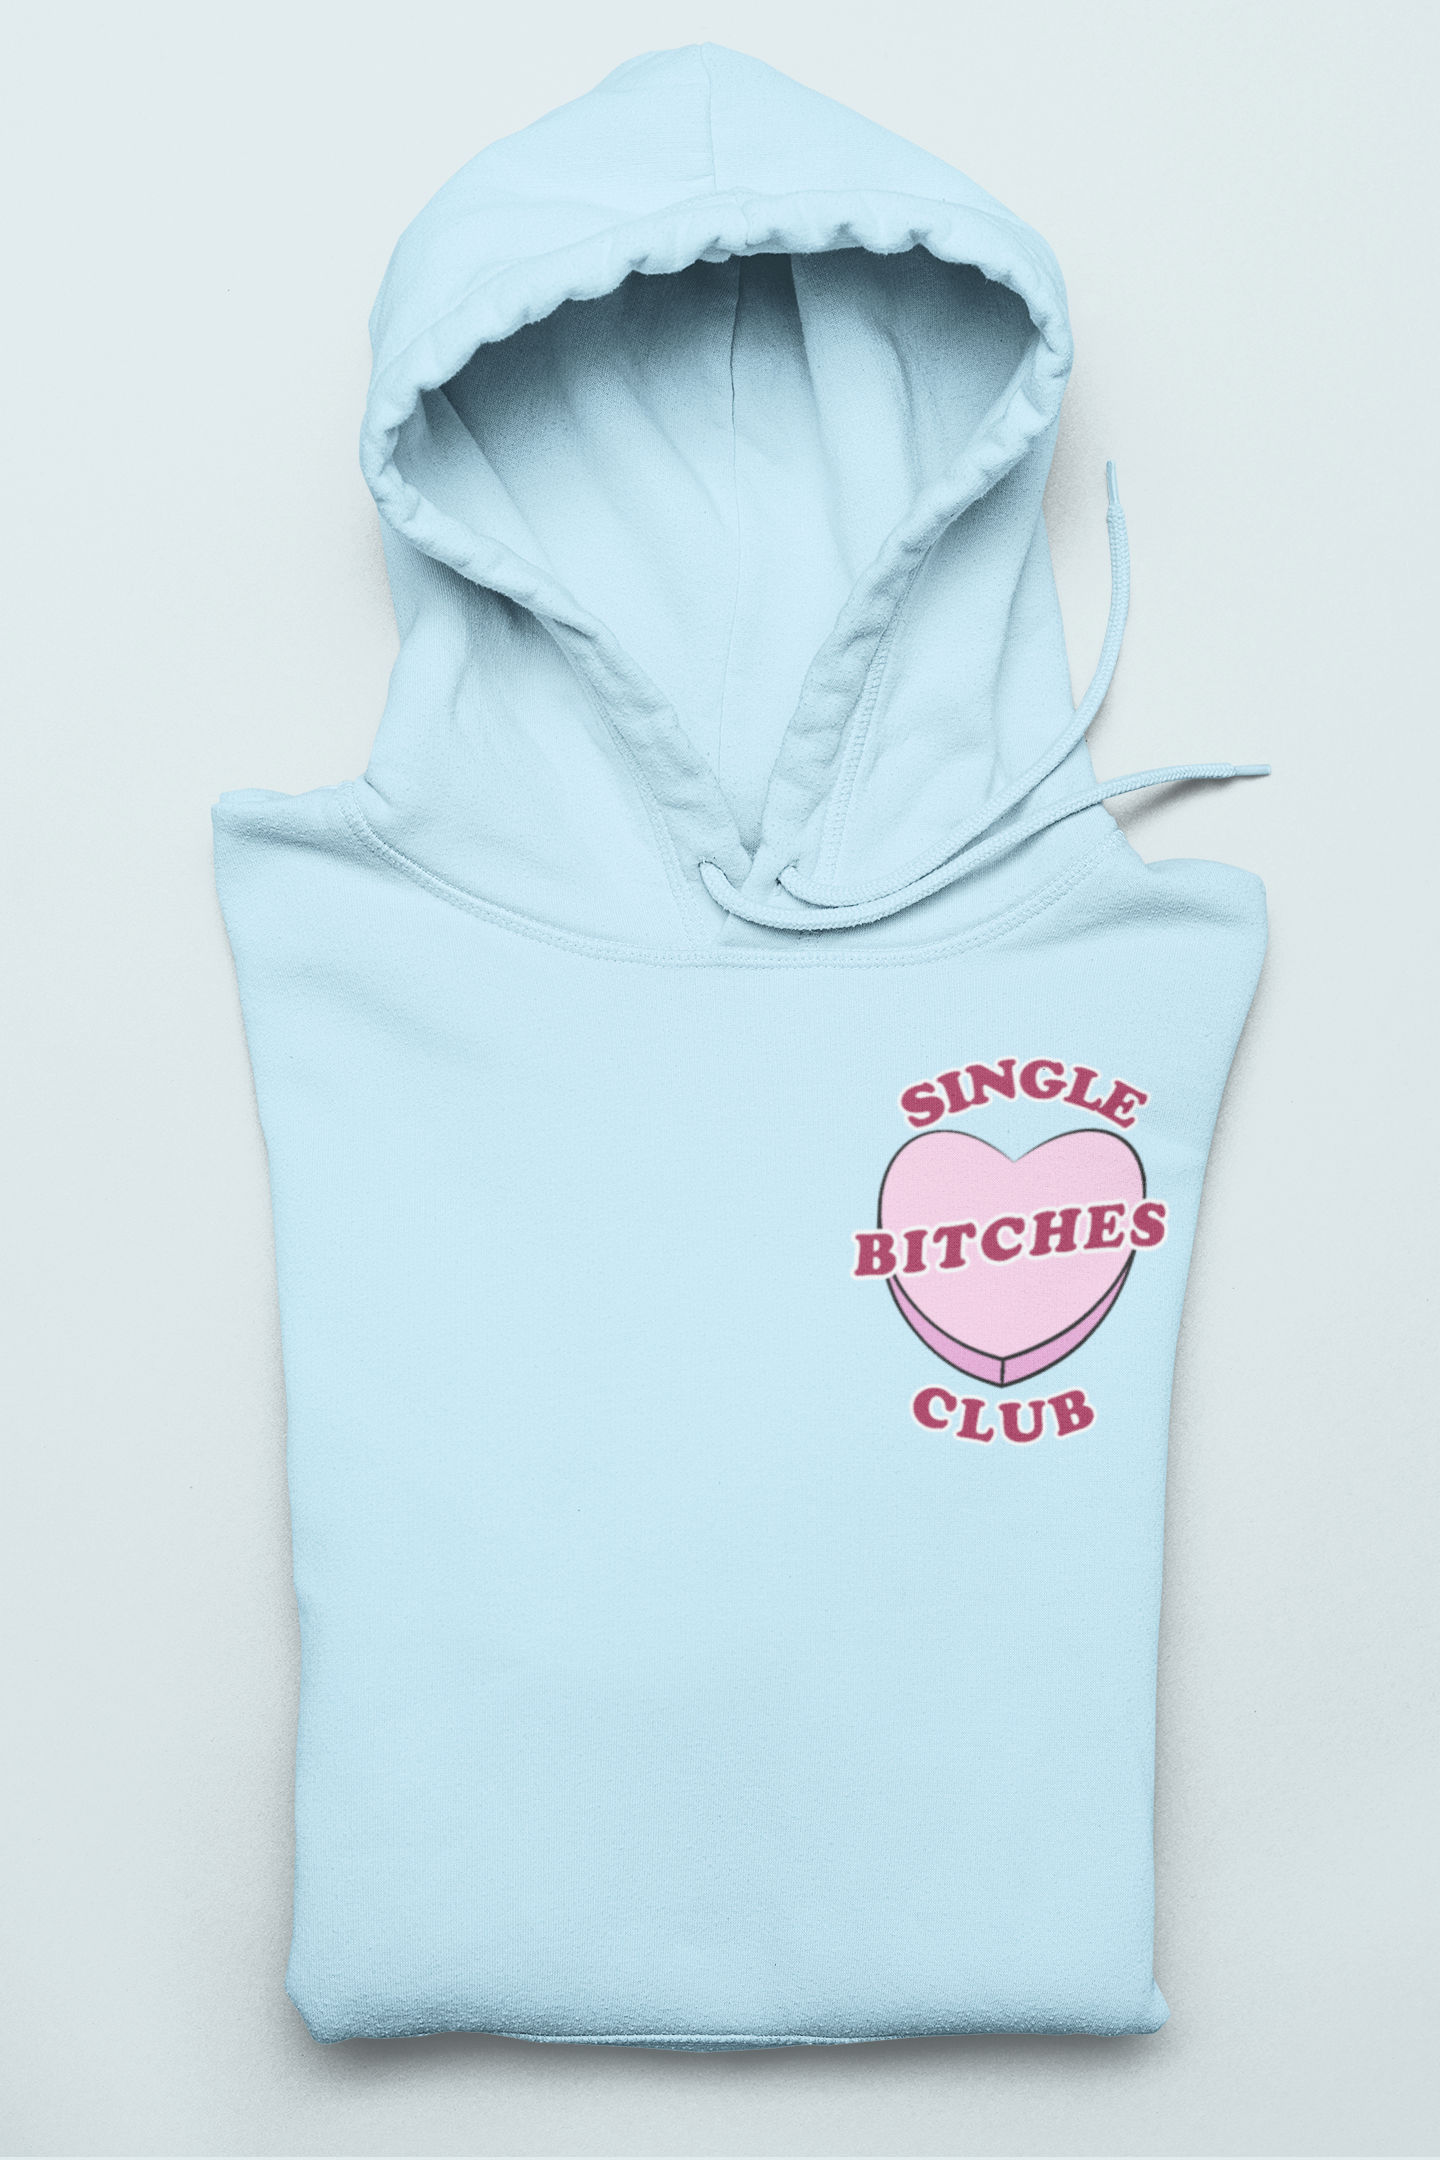 Light blue hoodie with a candy heart saying single bitches club - HighCiti